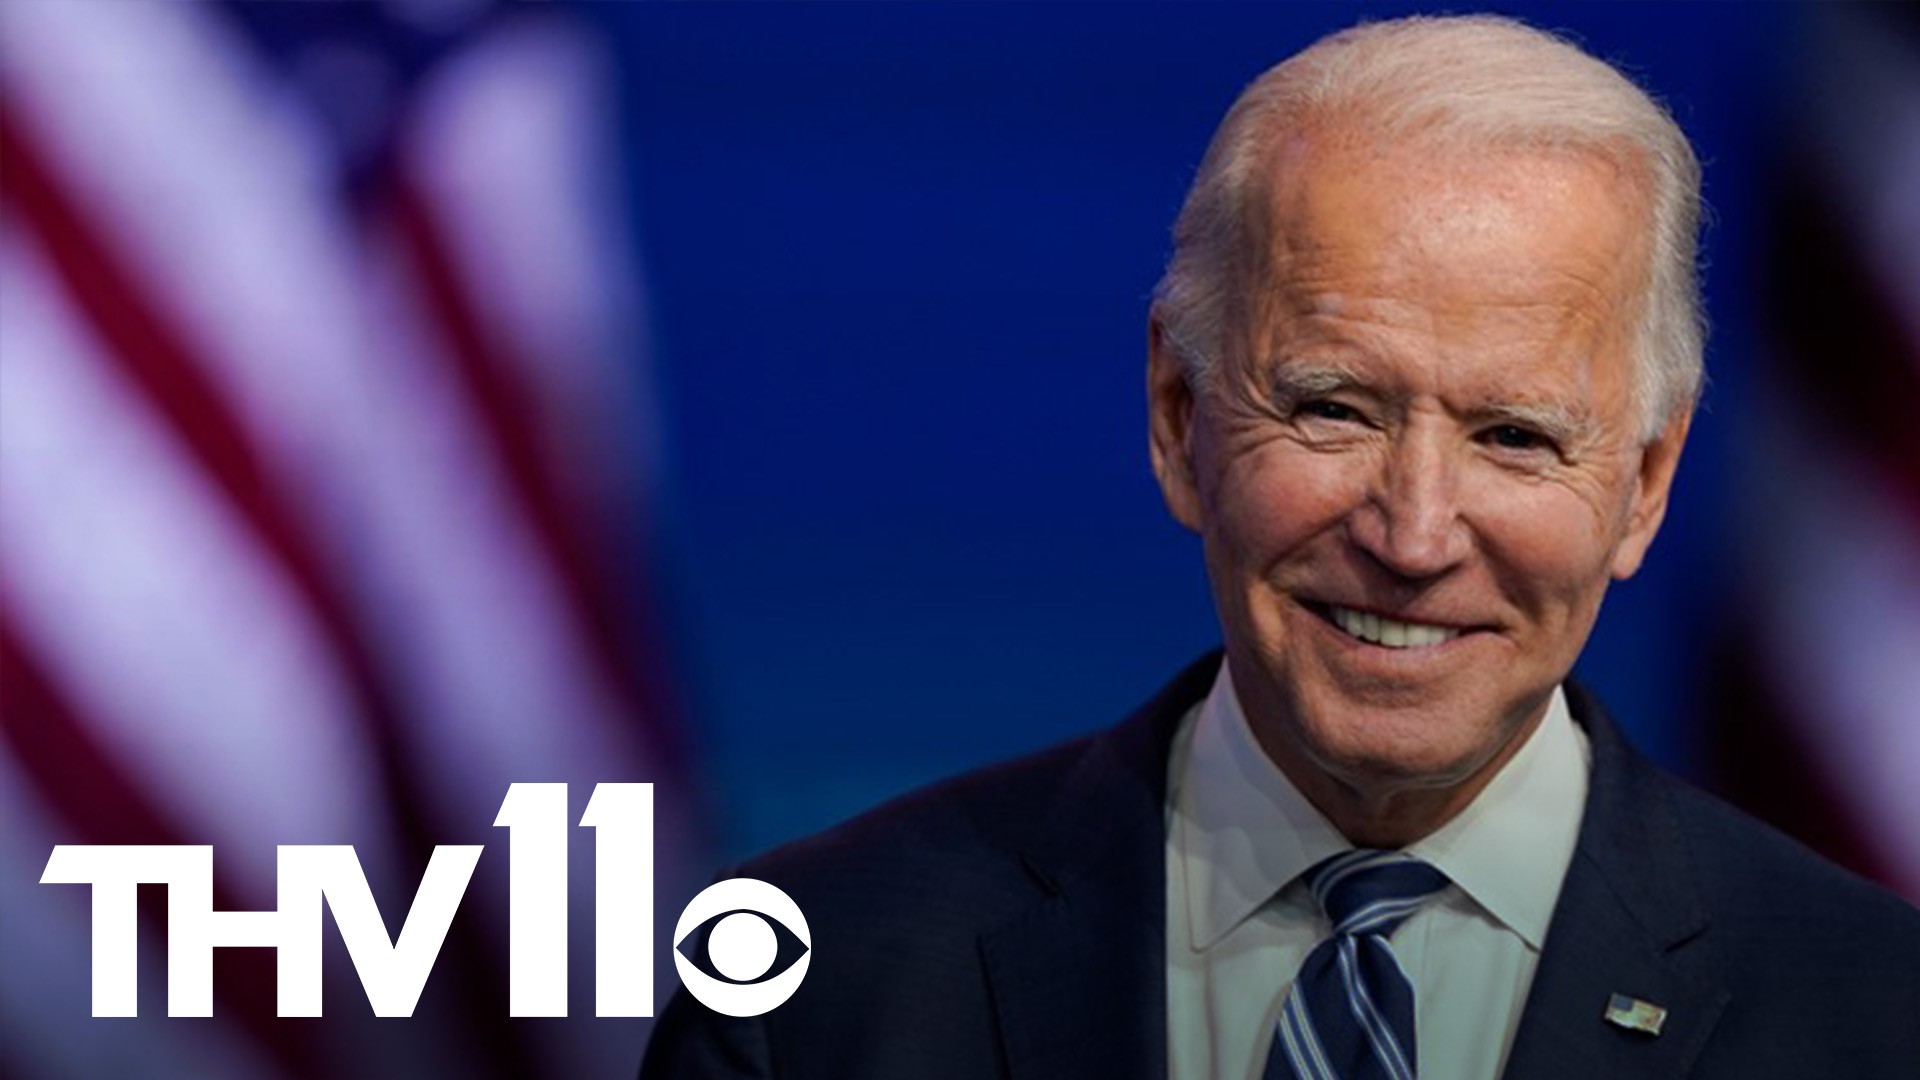 Career federal officials are opening the doors of agencies to hundreds of transition aides ready to prepare for Biden's Jan. 20 inauguration.